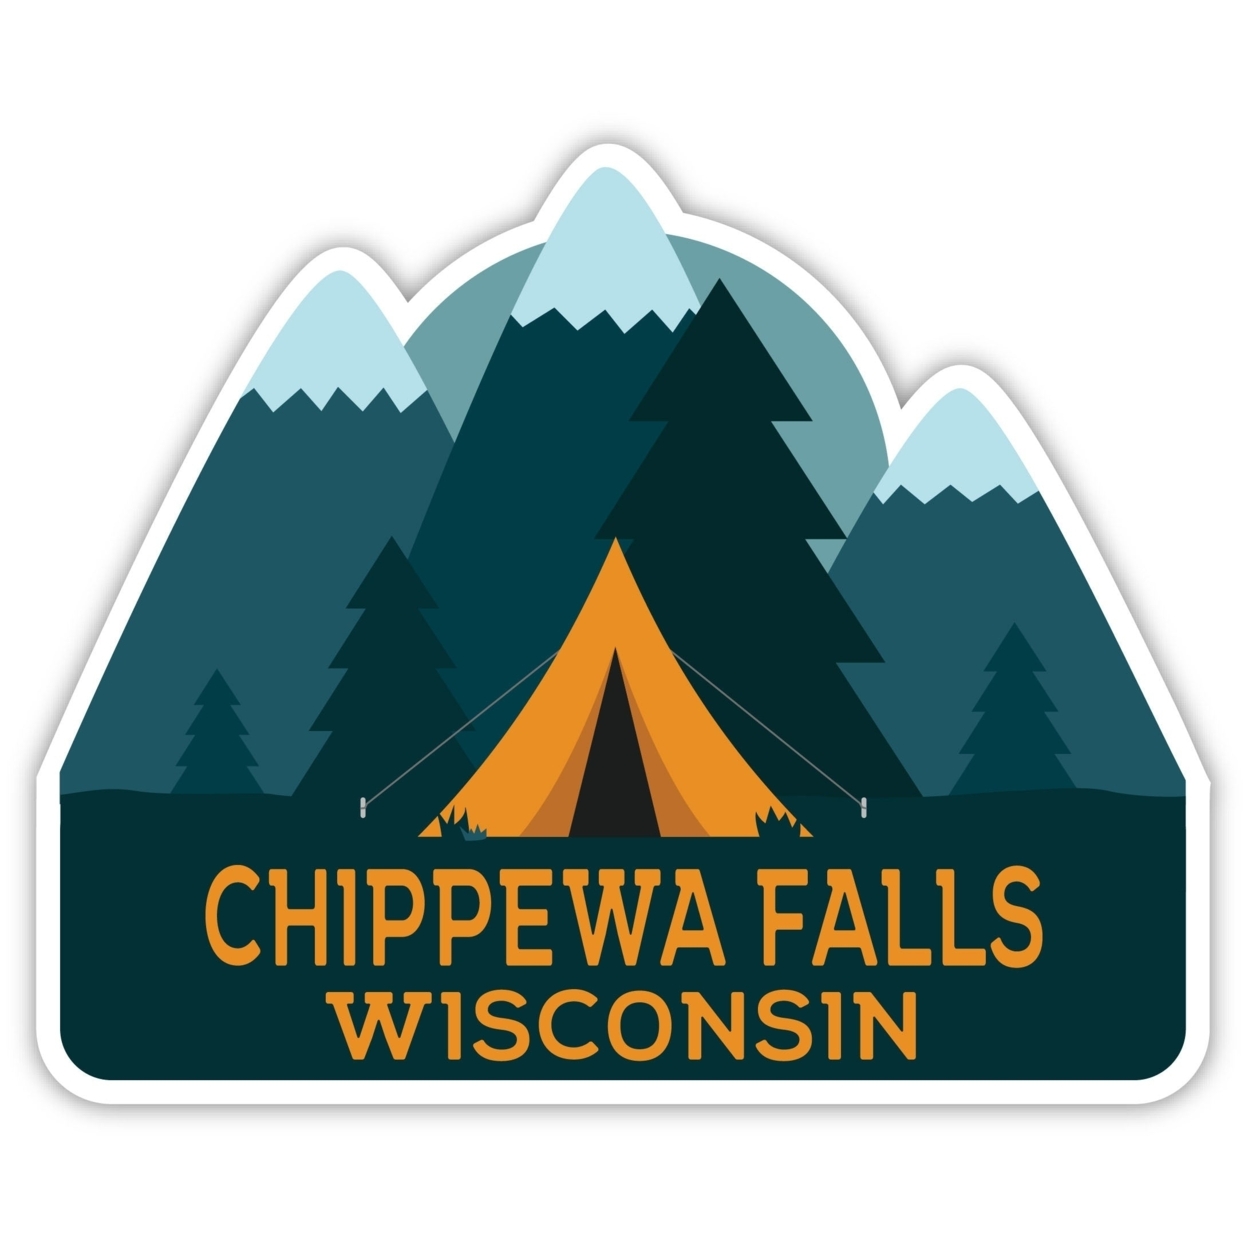 Chippewa Falls Wisconsin Souvenir Decorative Stickers (Choose Theme And Size) - 4-Pack, 6-Inch, Tent